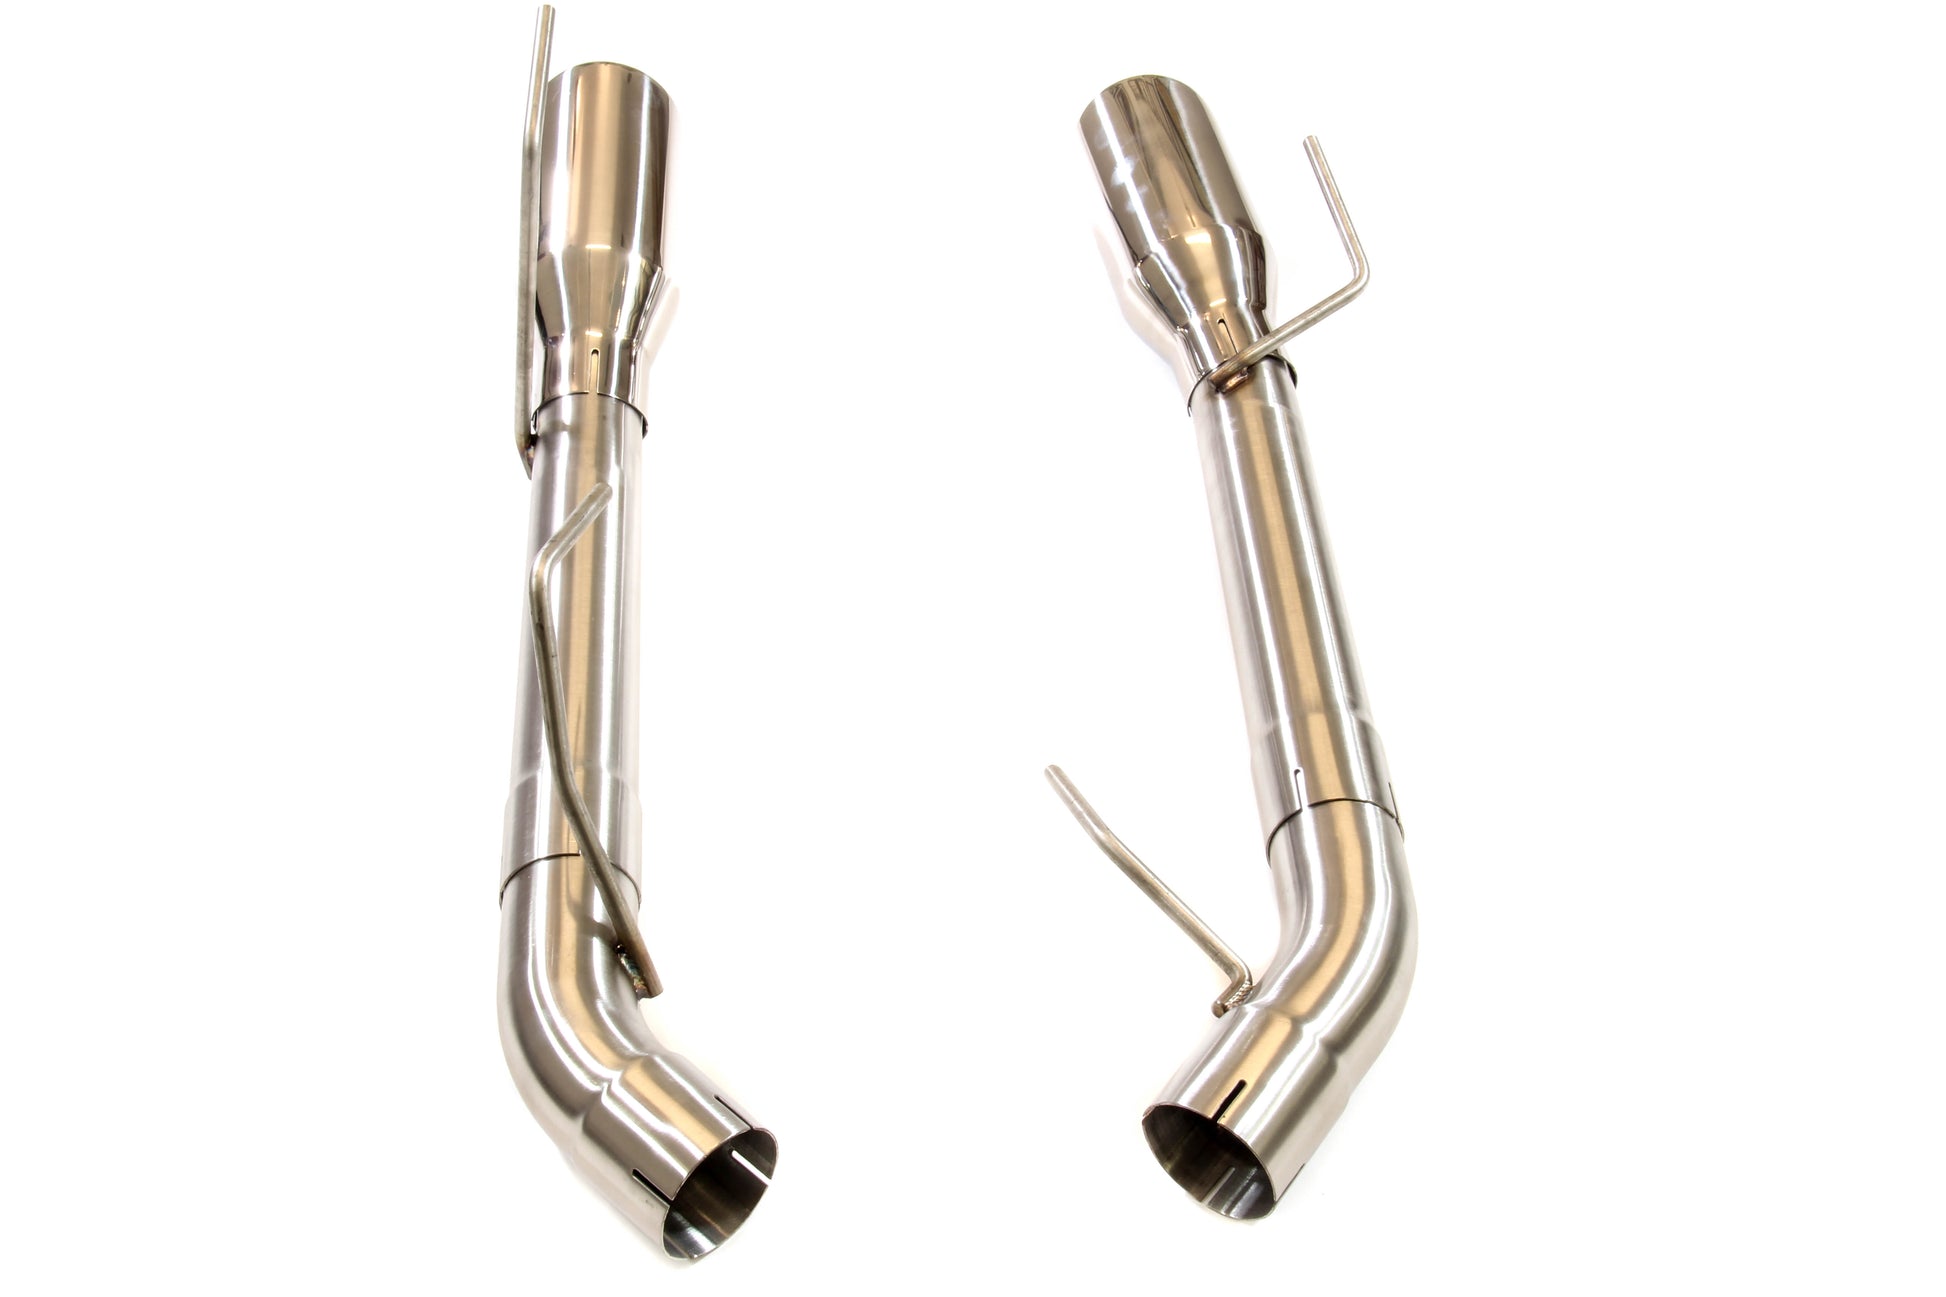 PLM 2.5"" Dual Axle Back Exhaust Pipe Kit Mustang 05-10 V8 GT GT500 - Shift Up Racing